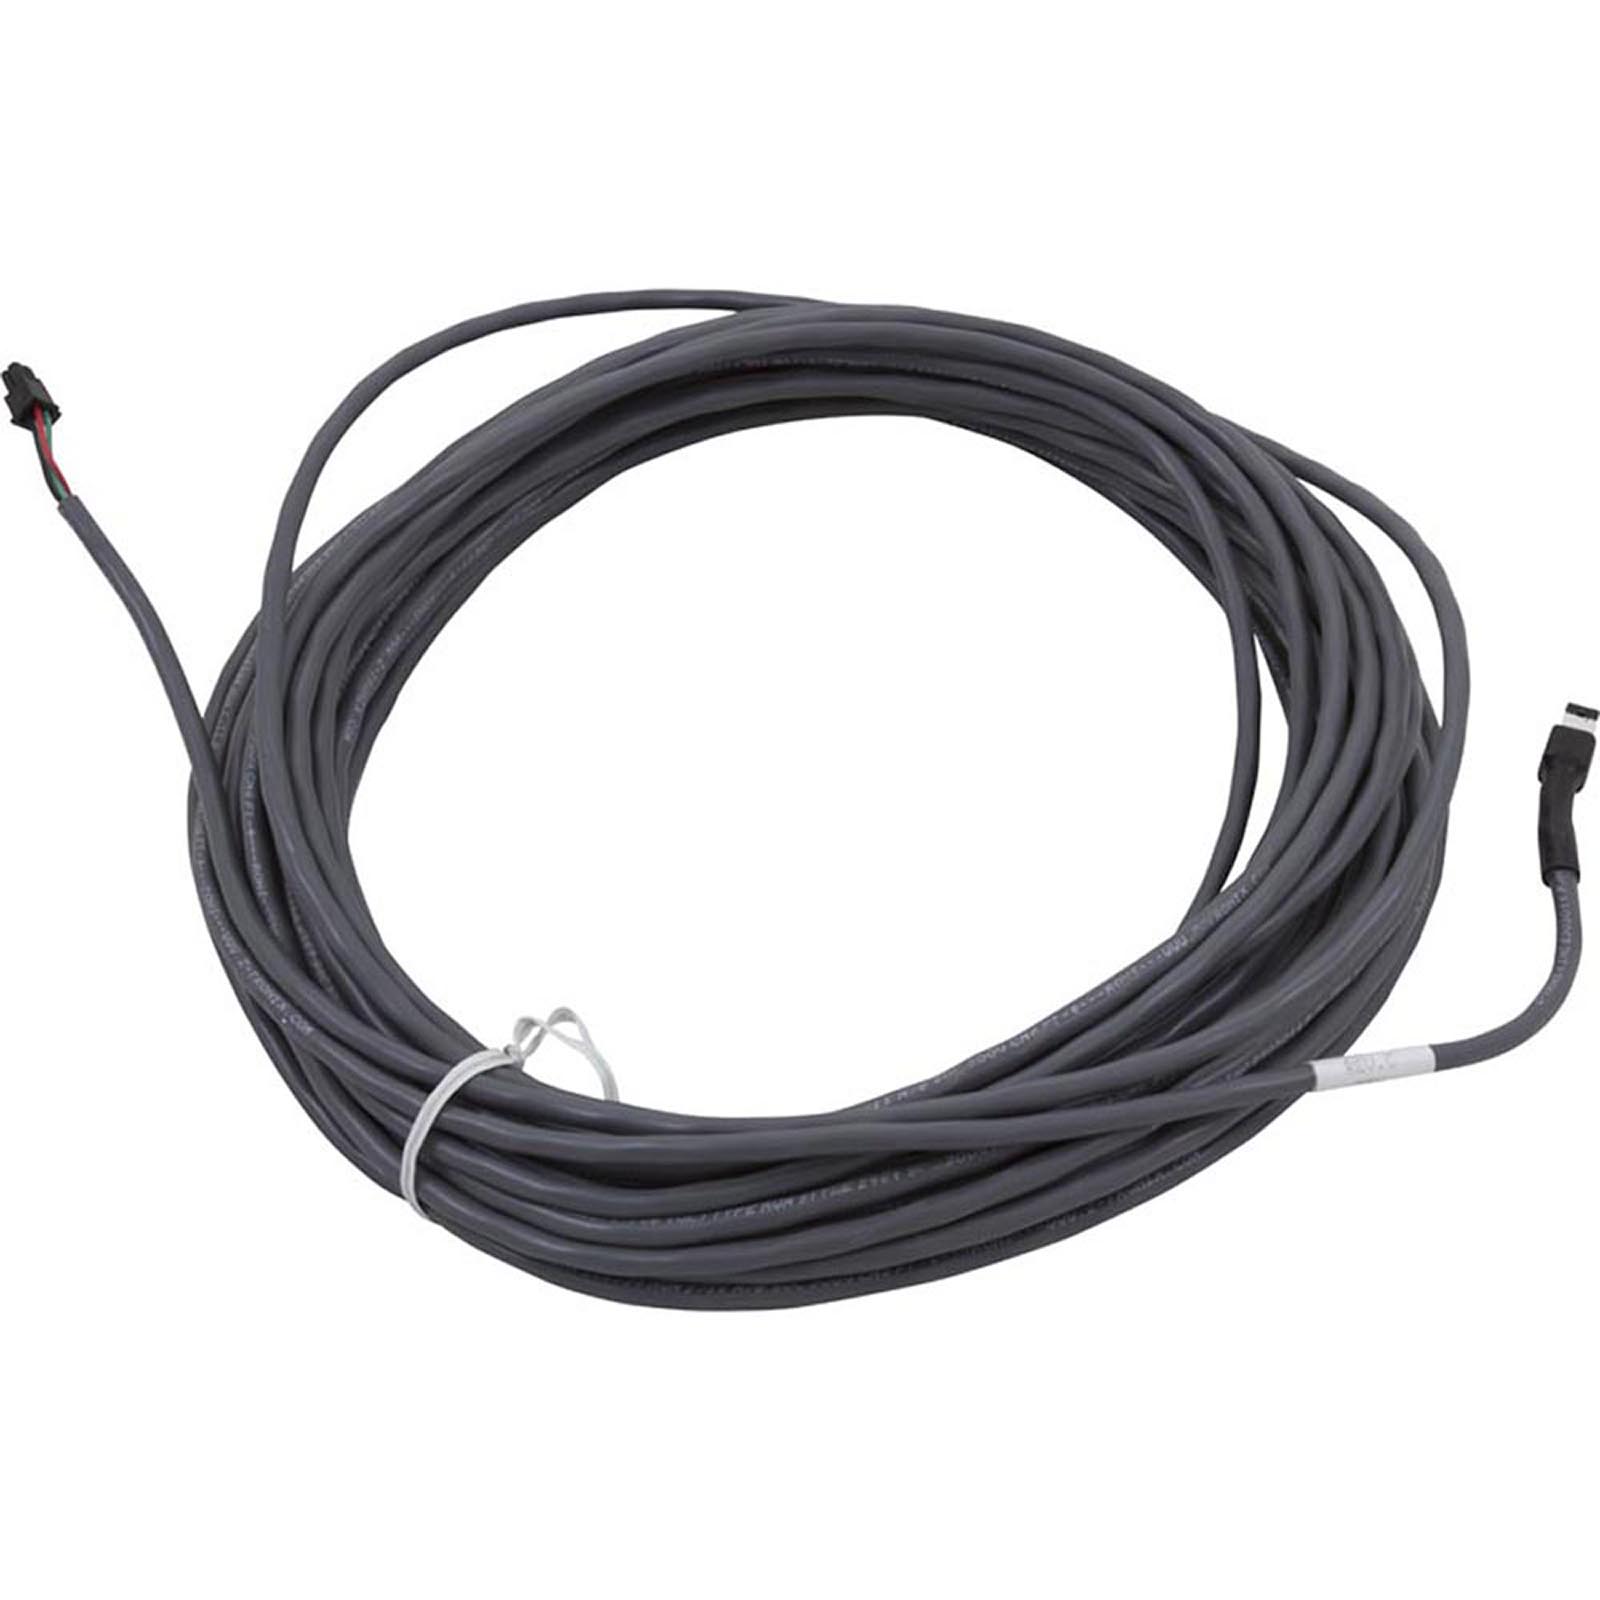 Picture of 30-25662-50 Topside Extension Cable HQ-BWG BP Series 4 Pin 50'Molex